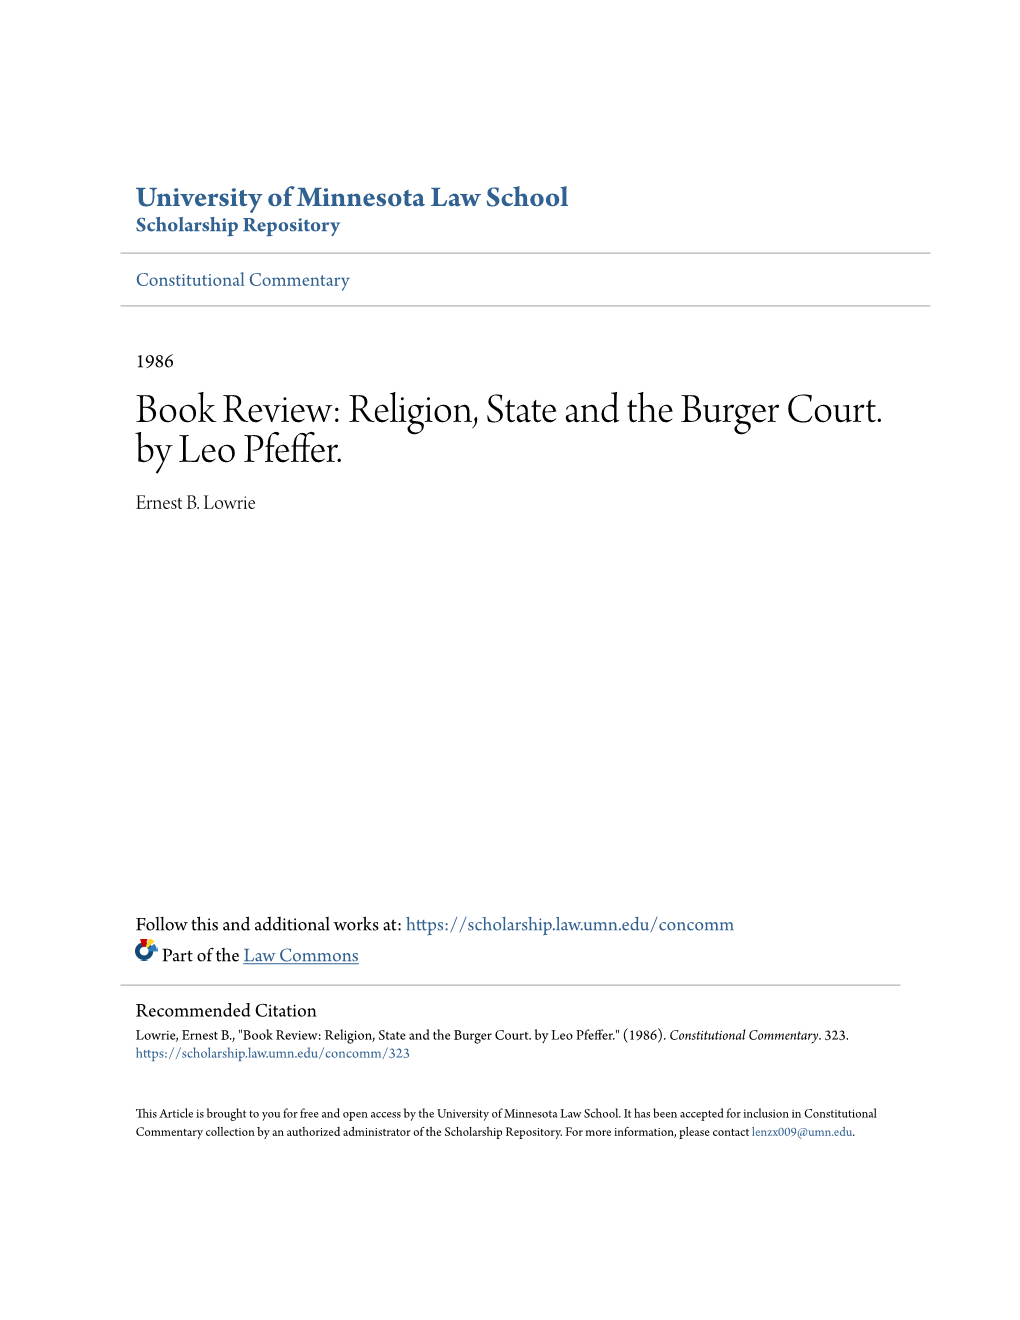 Book Review: Religion, State and the Burger Court. by Leo Pfeffer. Ernest B